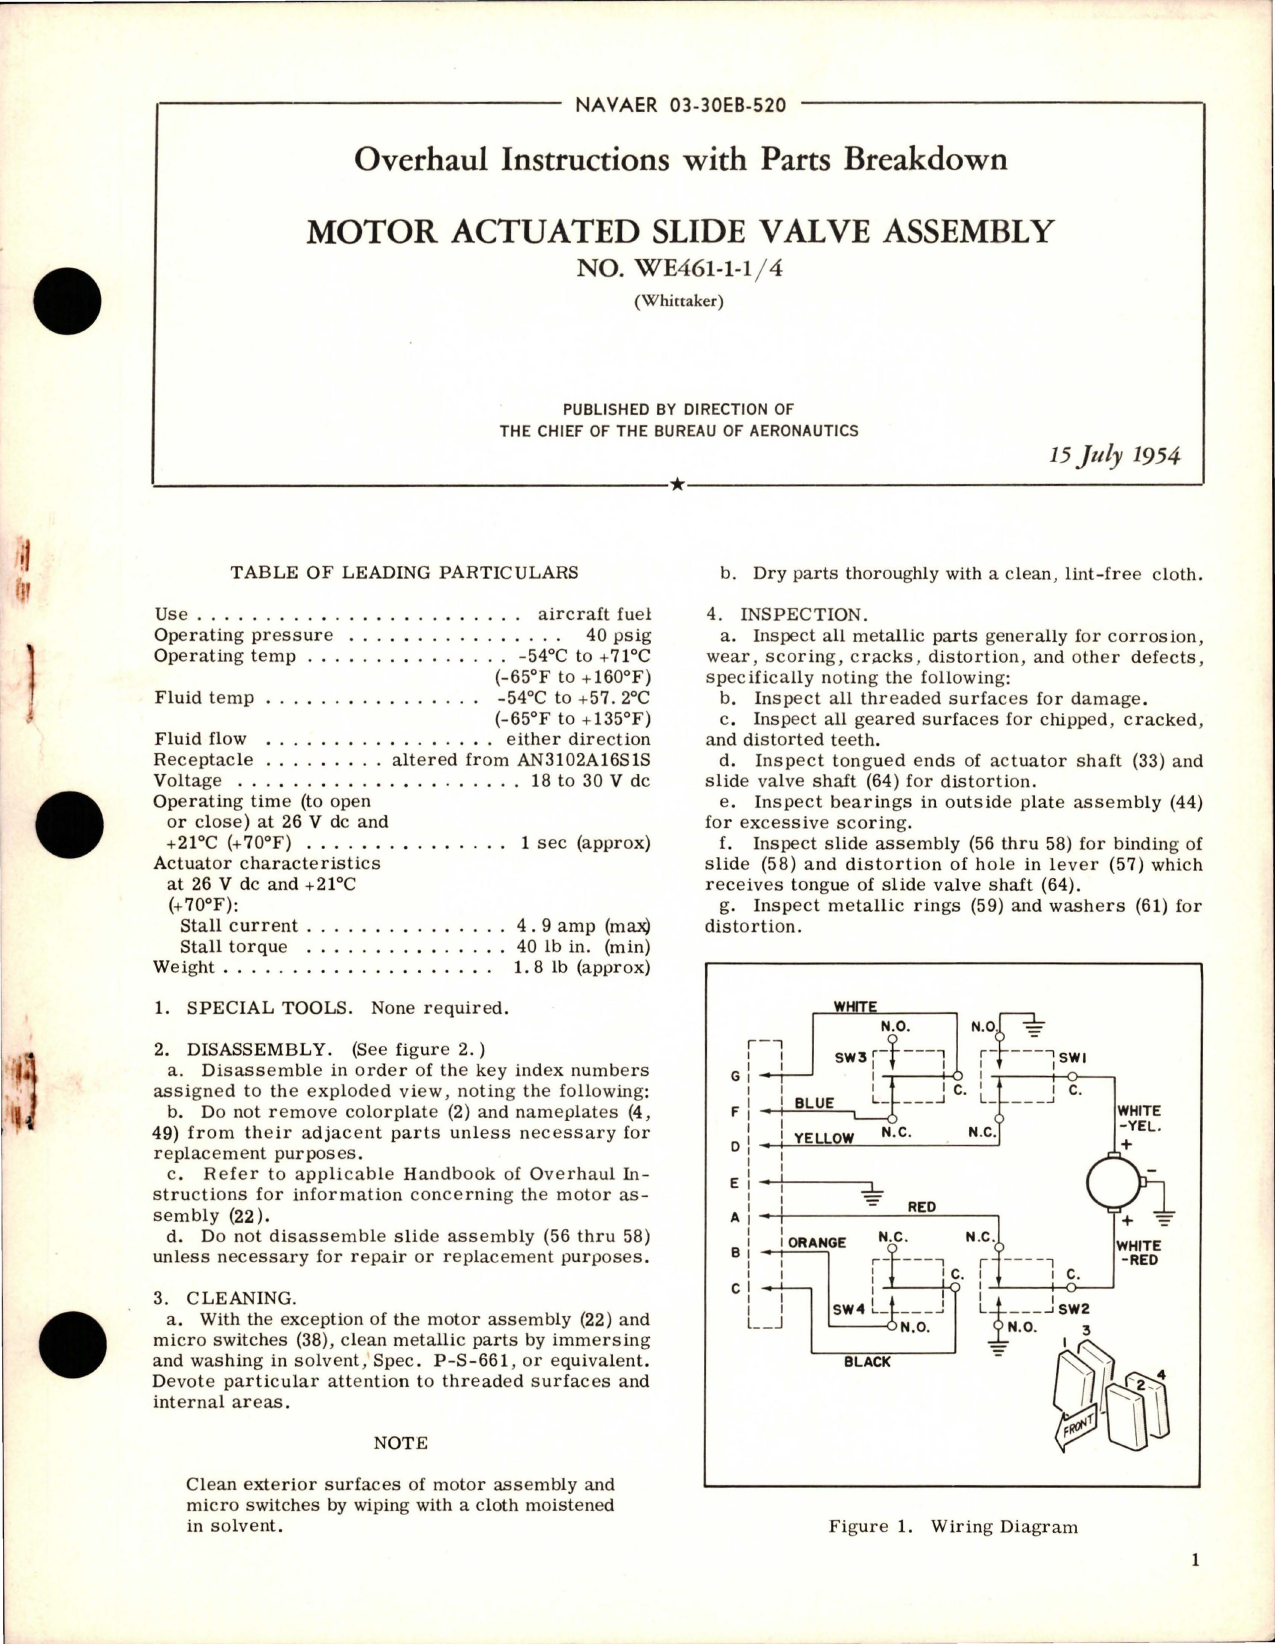 Sample page 1 from AirCorps Library document: Overhaul Instructions with Parts for Motor Actuated Slide Valve Assembly - No. WE461-1-1/4